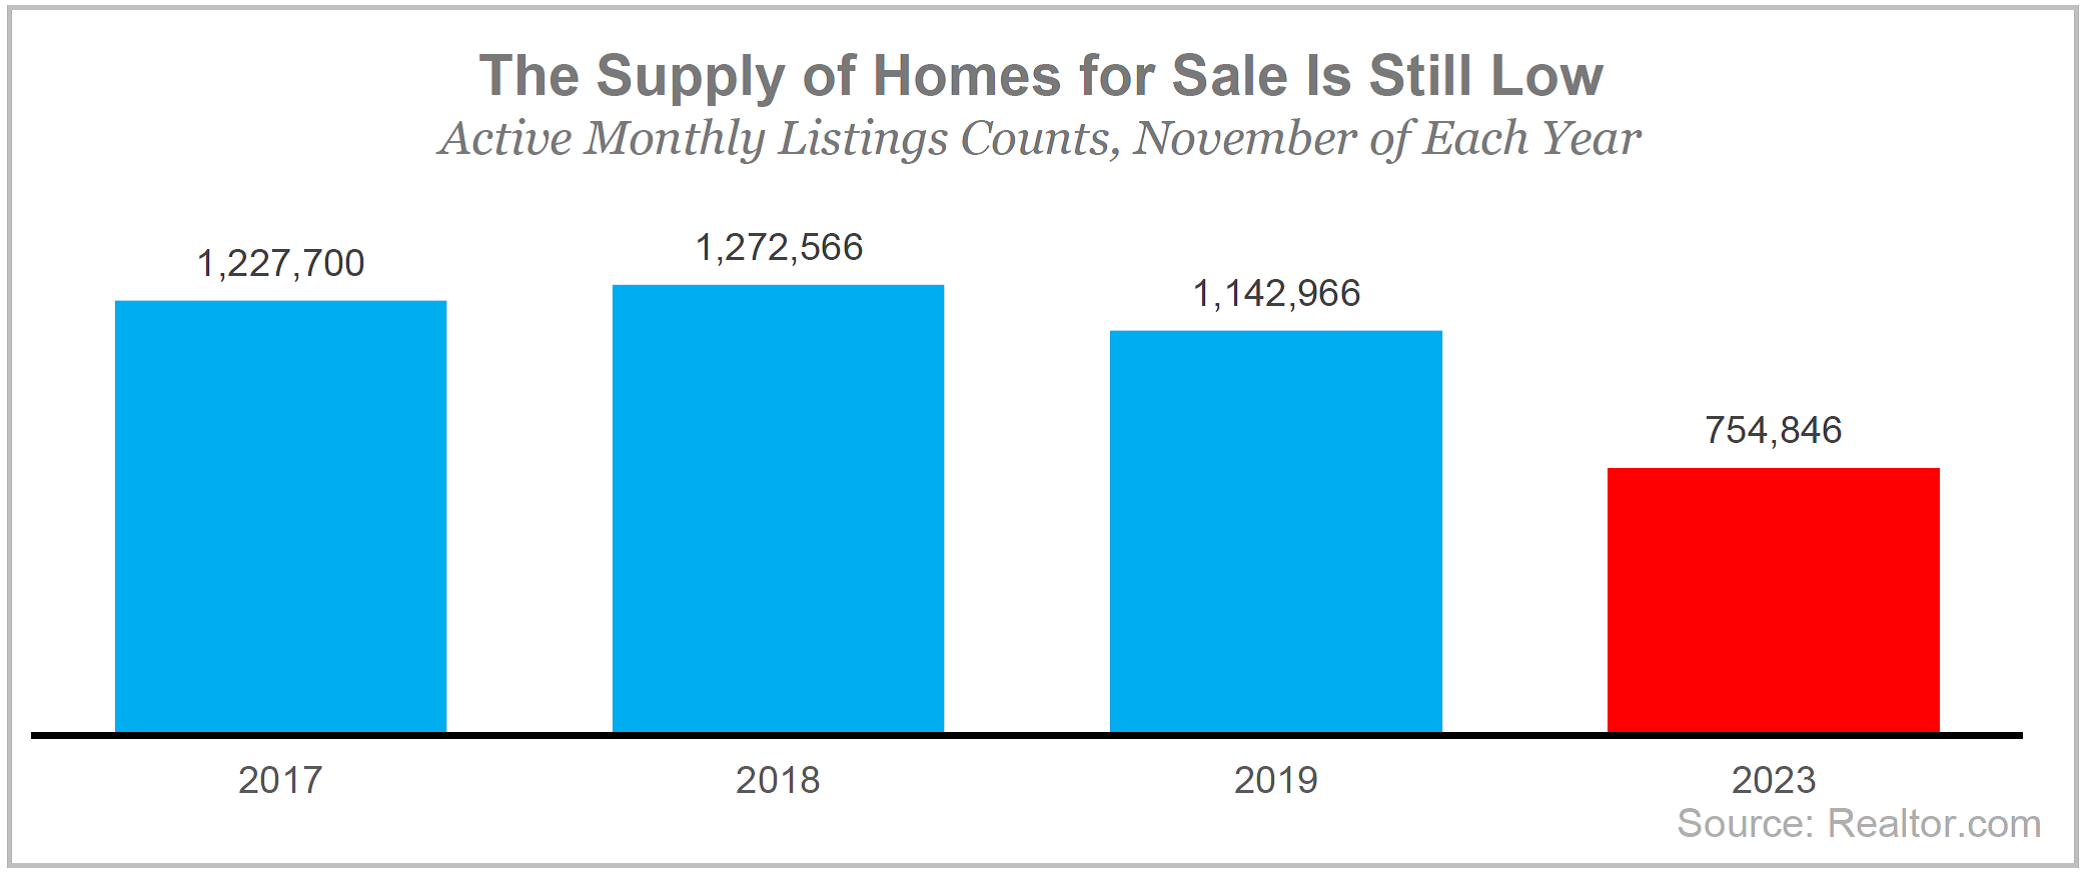 The Supply of Homes for Sale Is Still Low